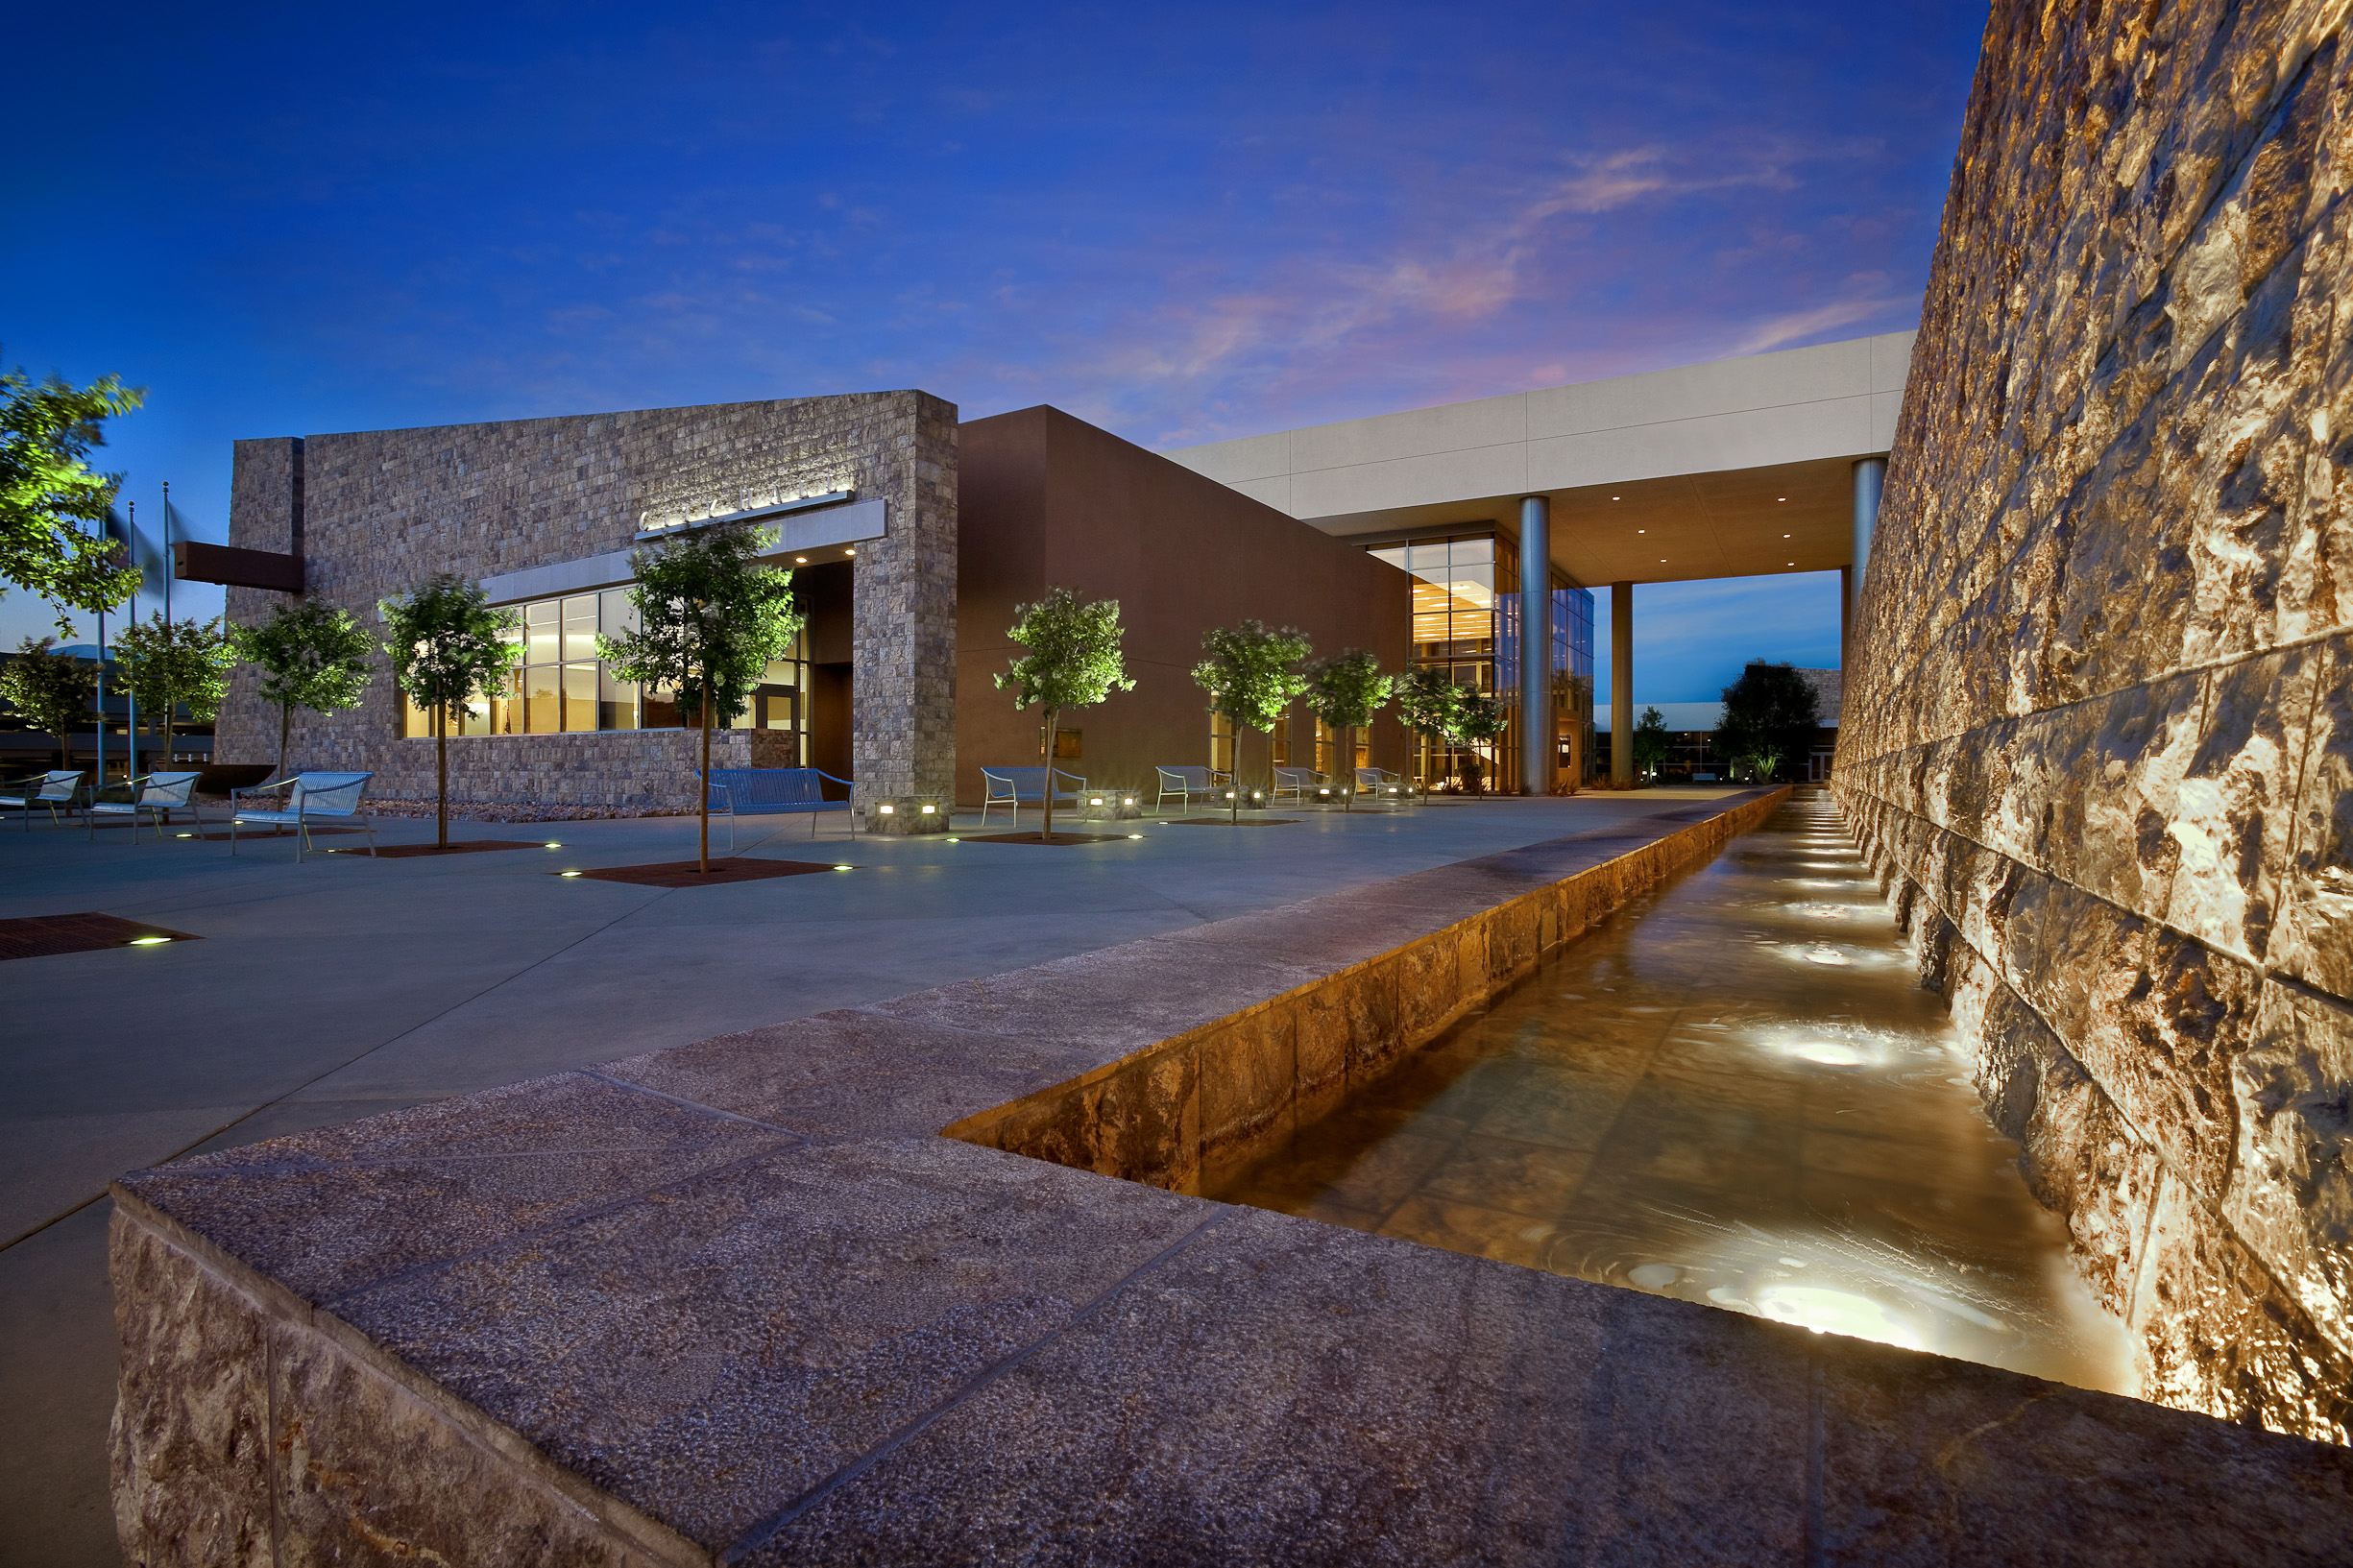 In concert with the adjacent retail, future residential components, the Chino Hills Government Center was designed to become the downtown of this community.